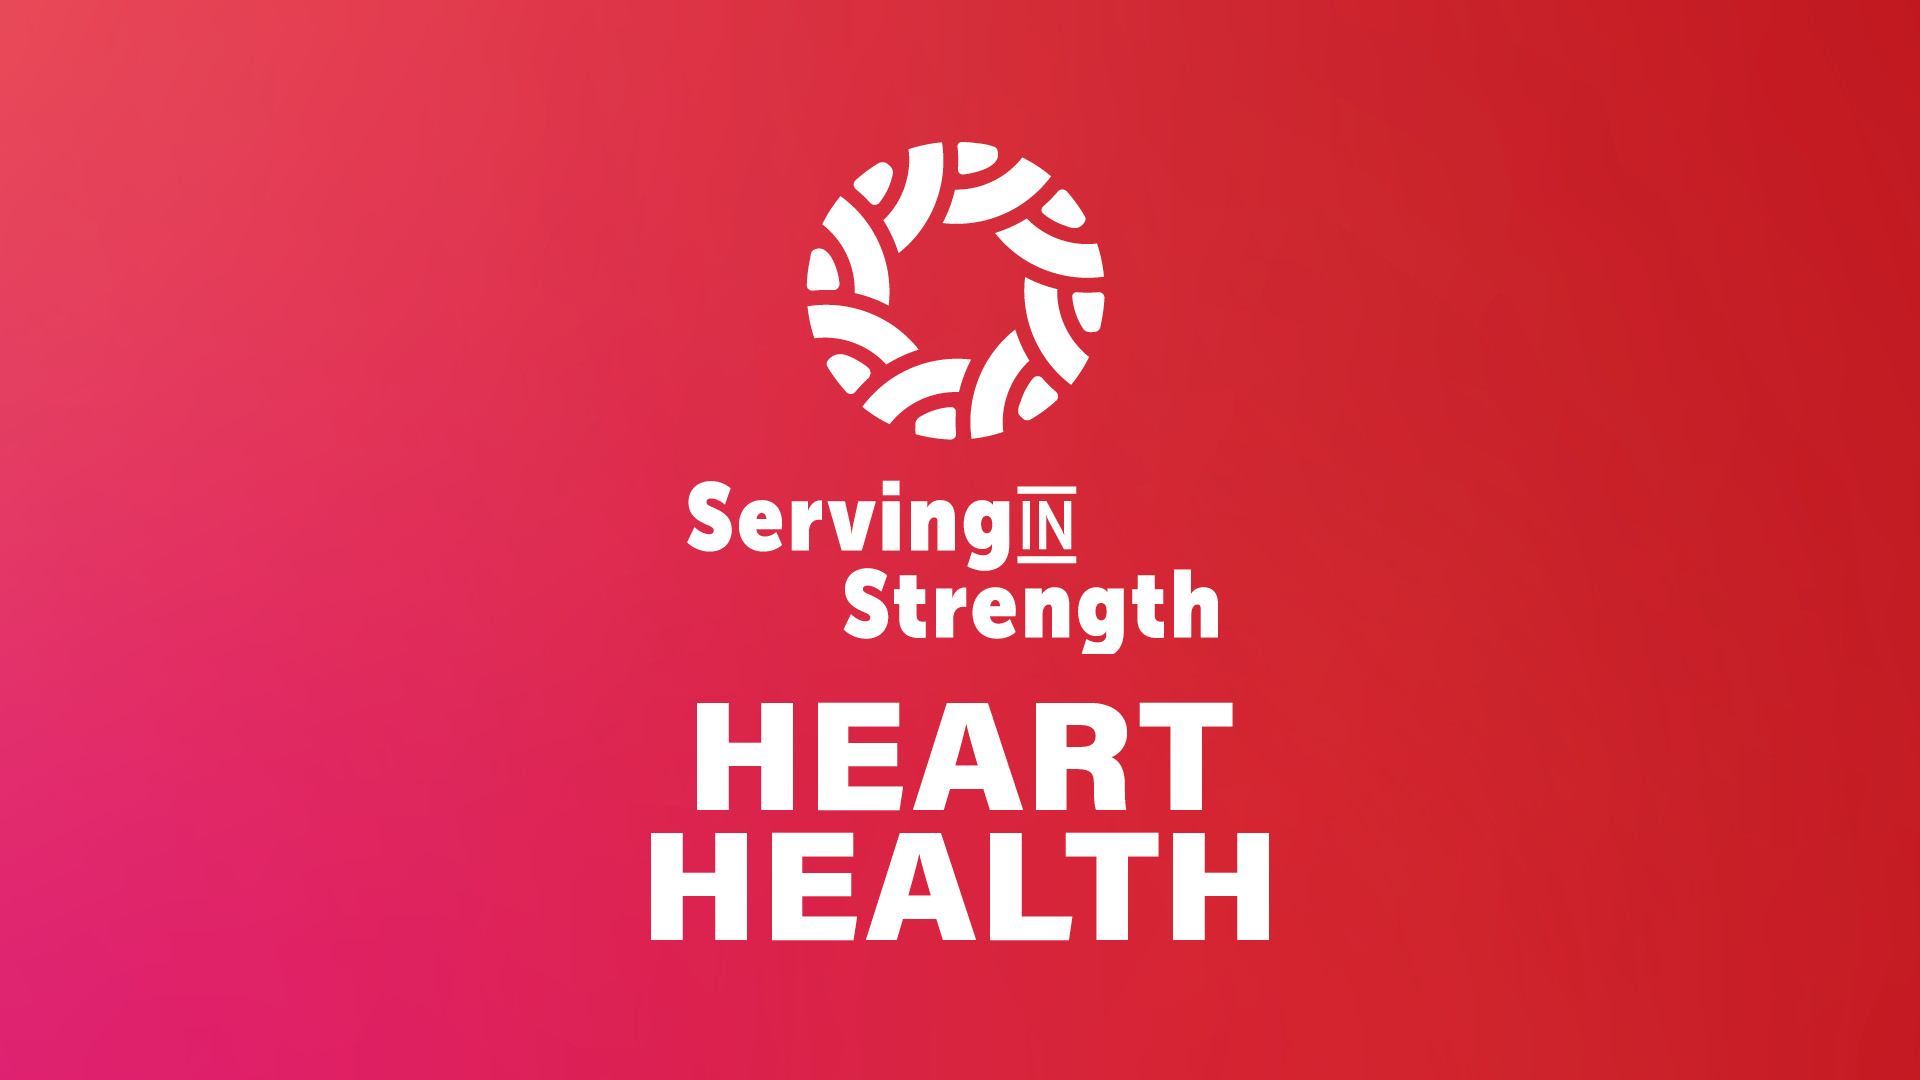 Serving In Strength Heart Health on a bright red background